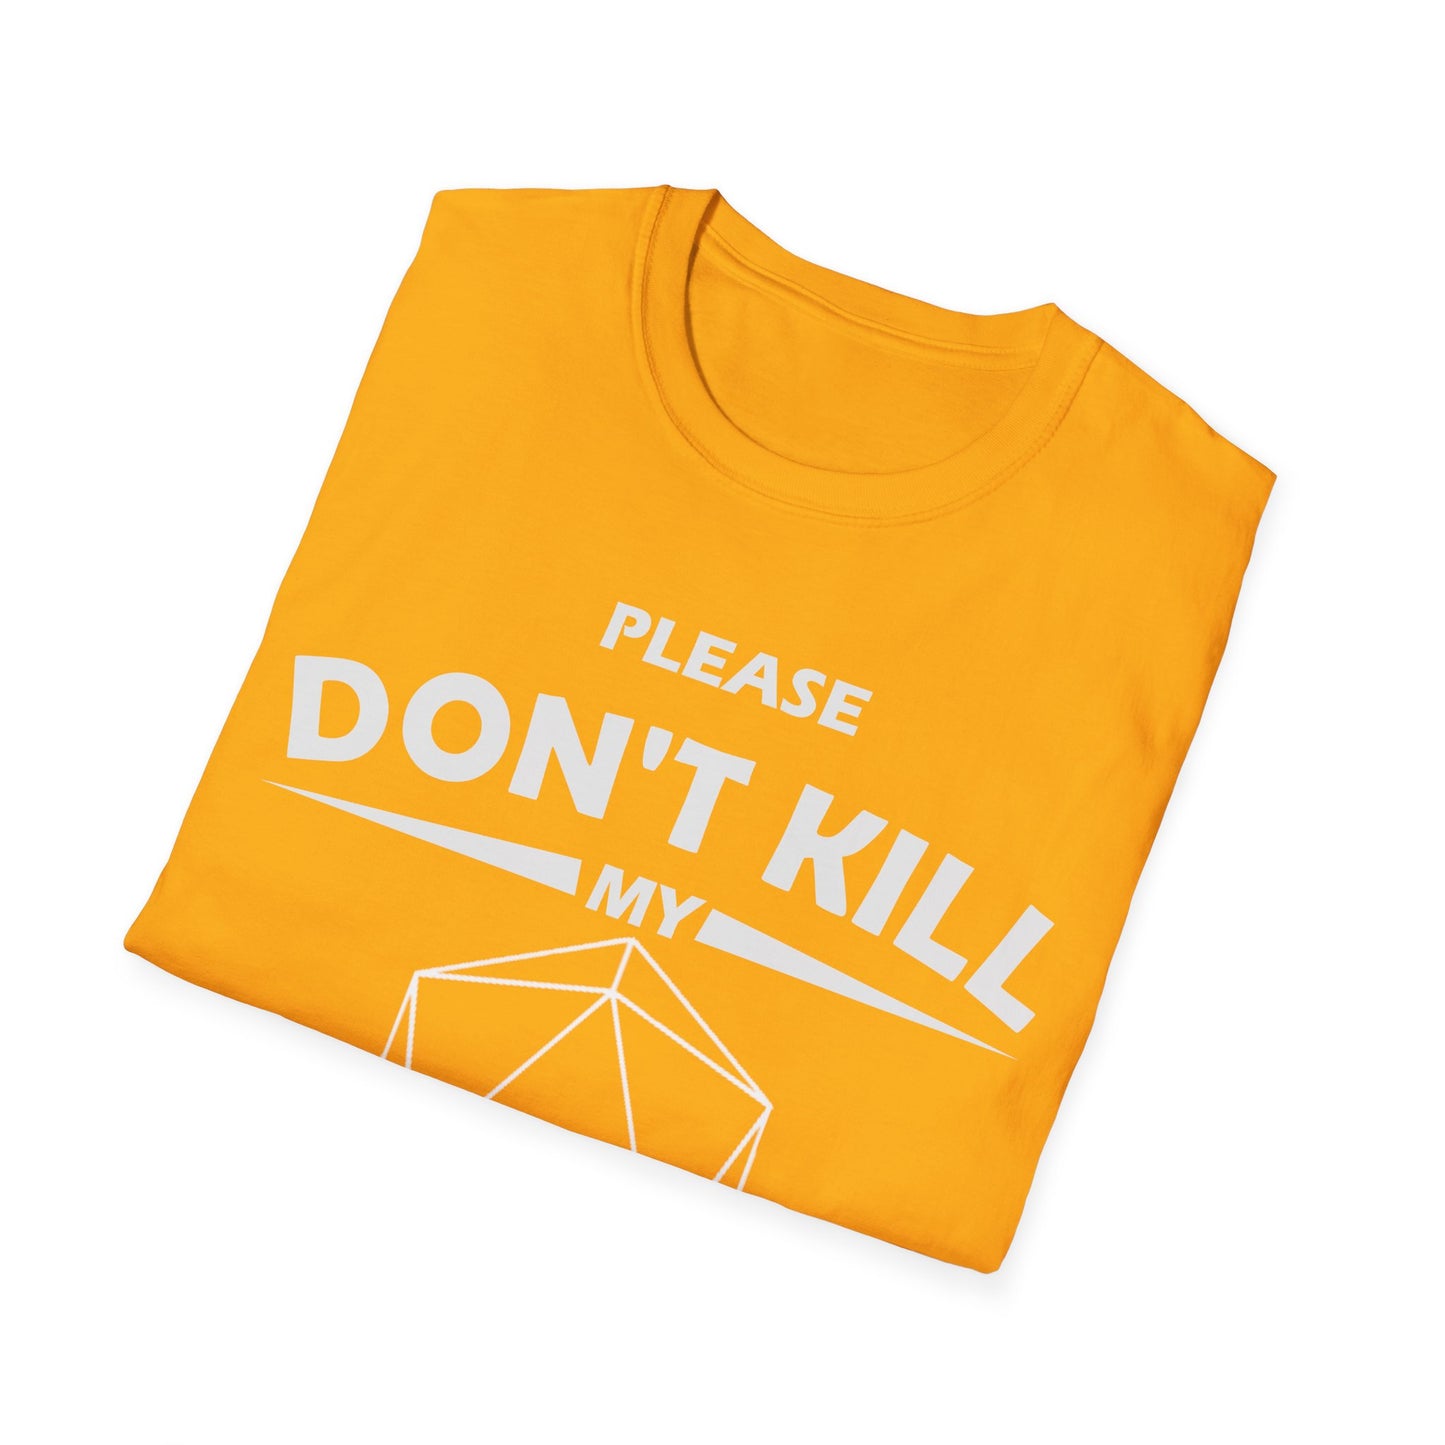 Please Don't Kill My Character - White - Unisex Softstyle T-Shirt